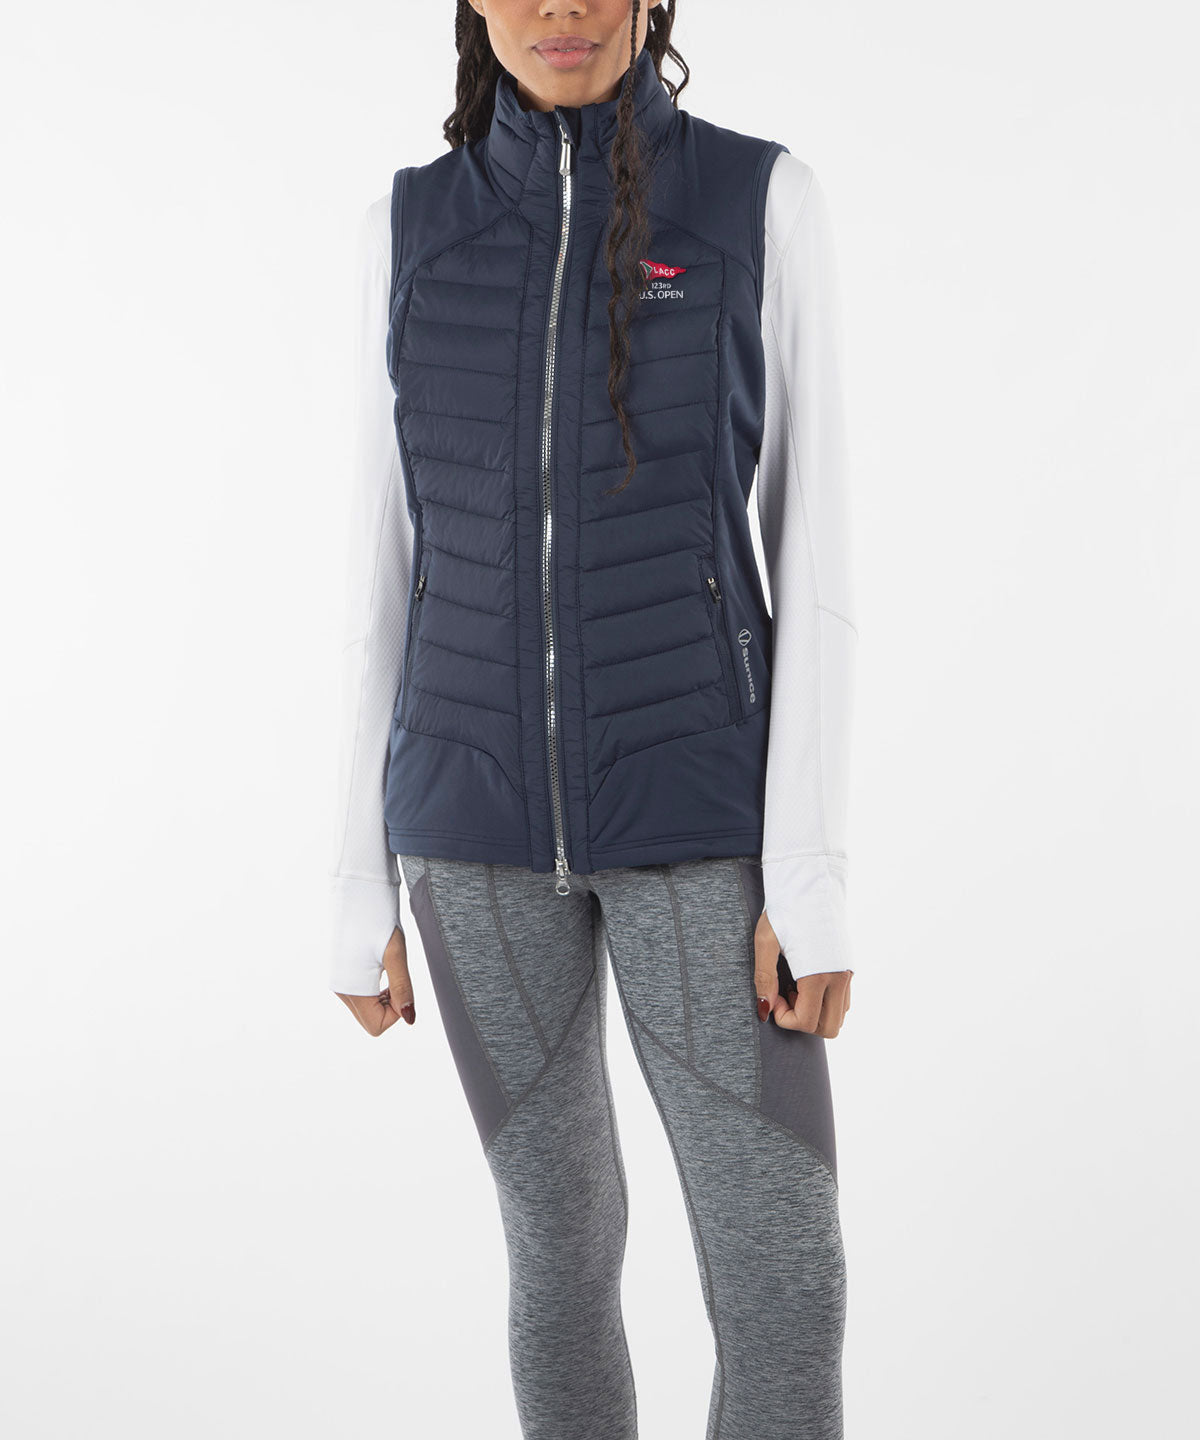 123rd U.S. Open Sunice Women's Lizzie Quilted Thermal Vest